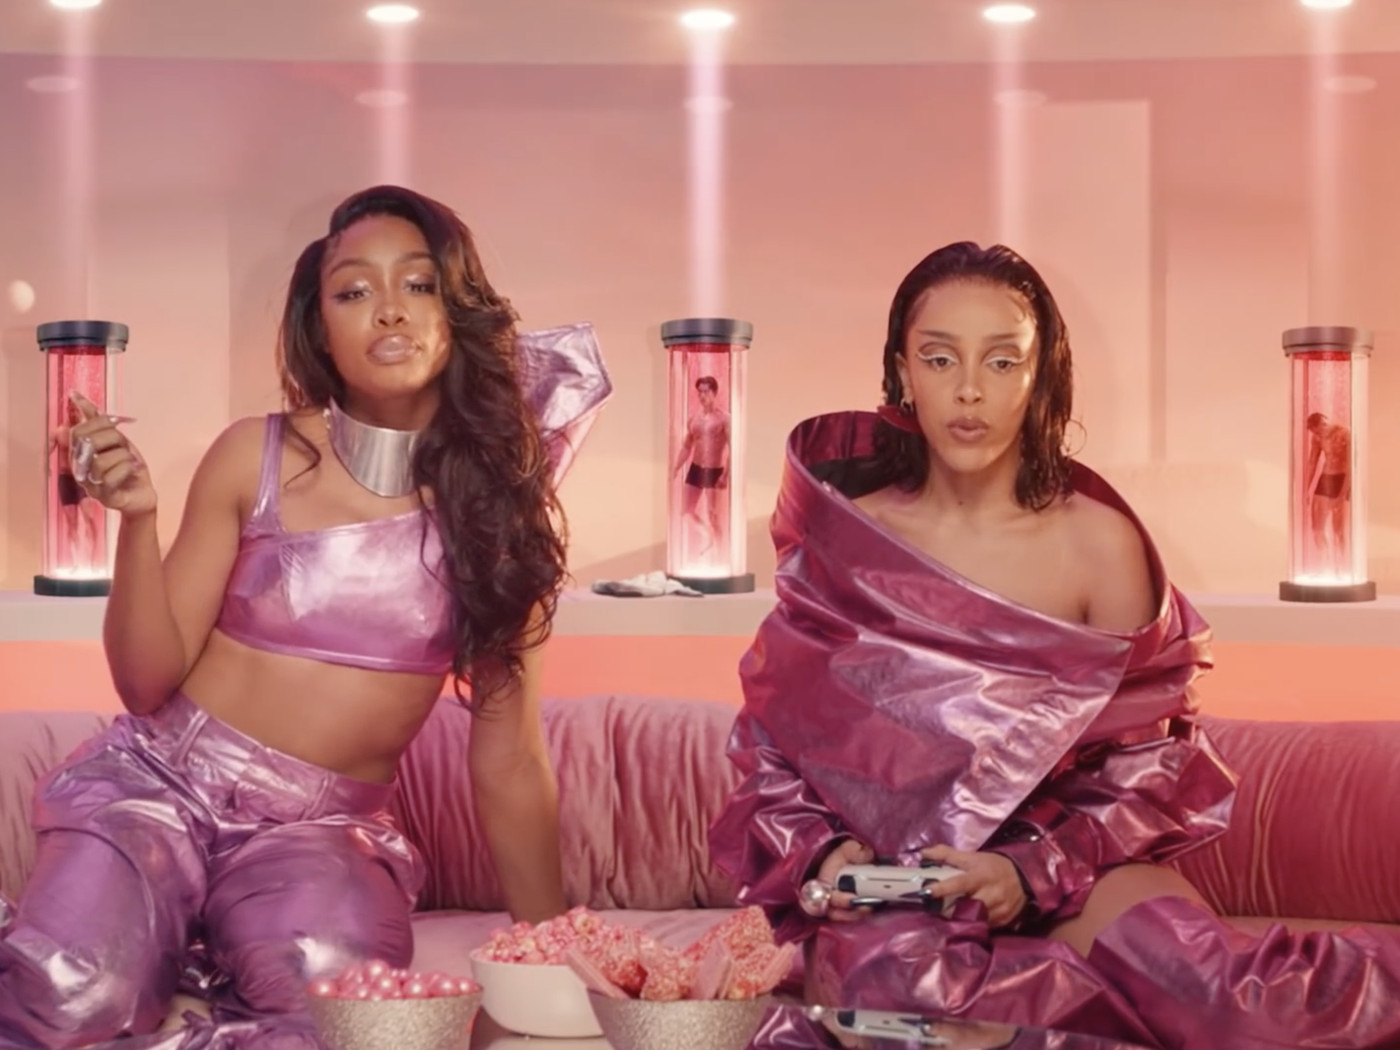 Doja Cat's “Kiss Me More” has a gaming reference at the end